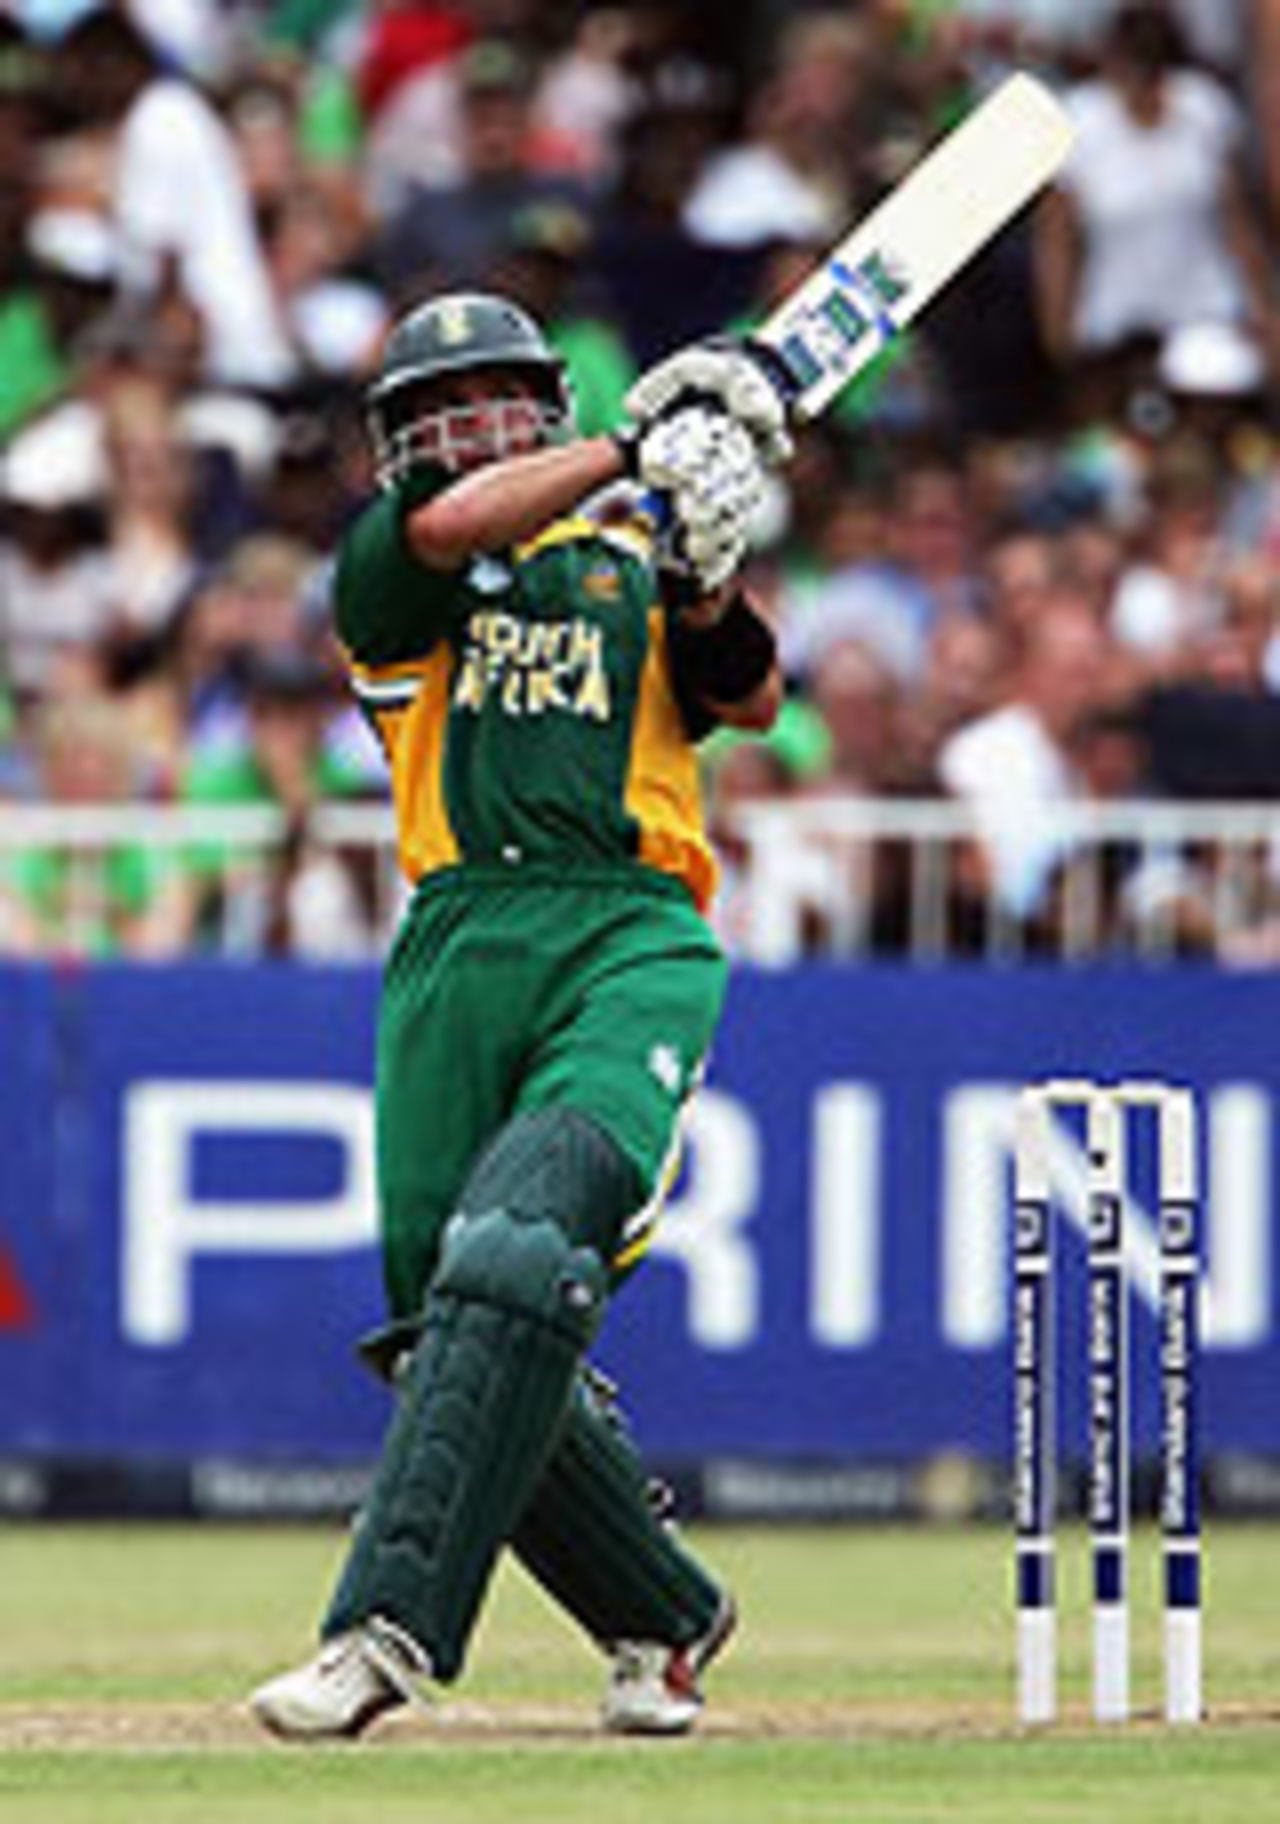 Herschelle Gibbs carried South Africa's innings with an unbeaten 103 in the sixth one-day international at Durban, South Africa v England, February 11, 2005